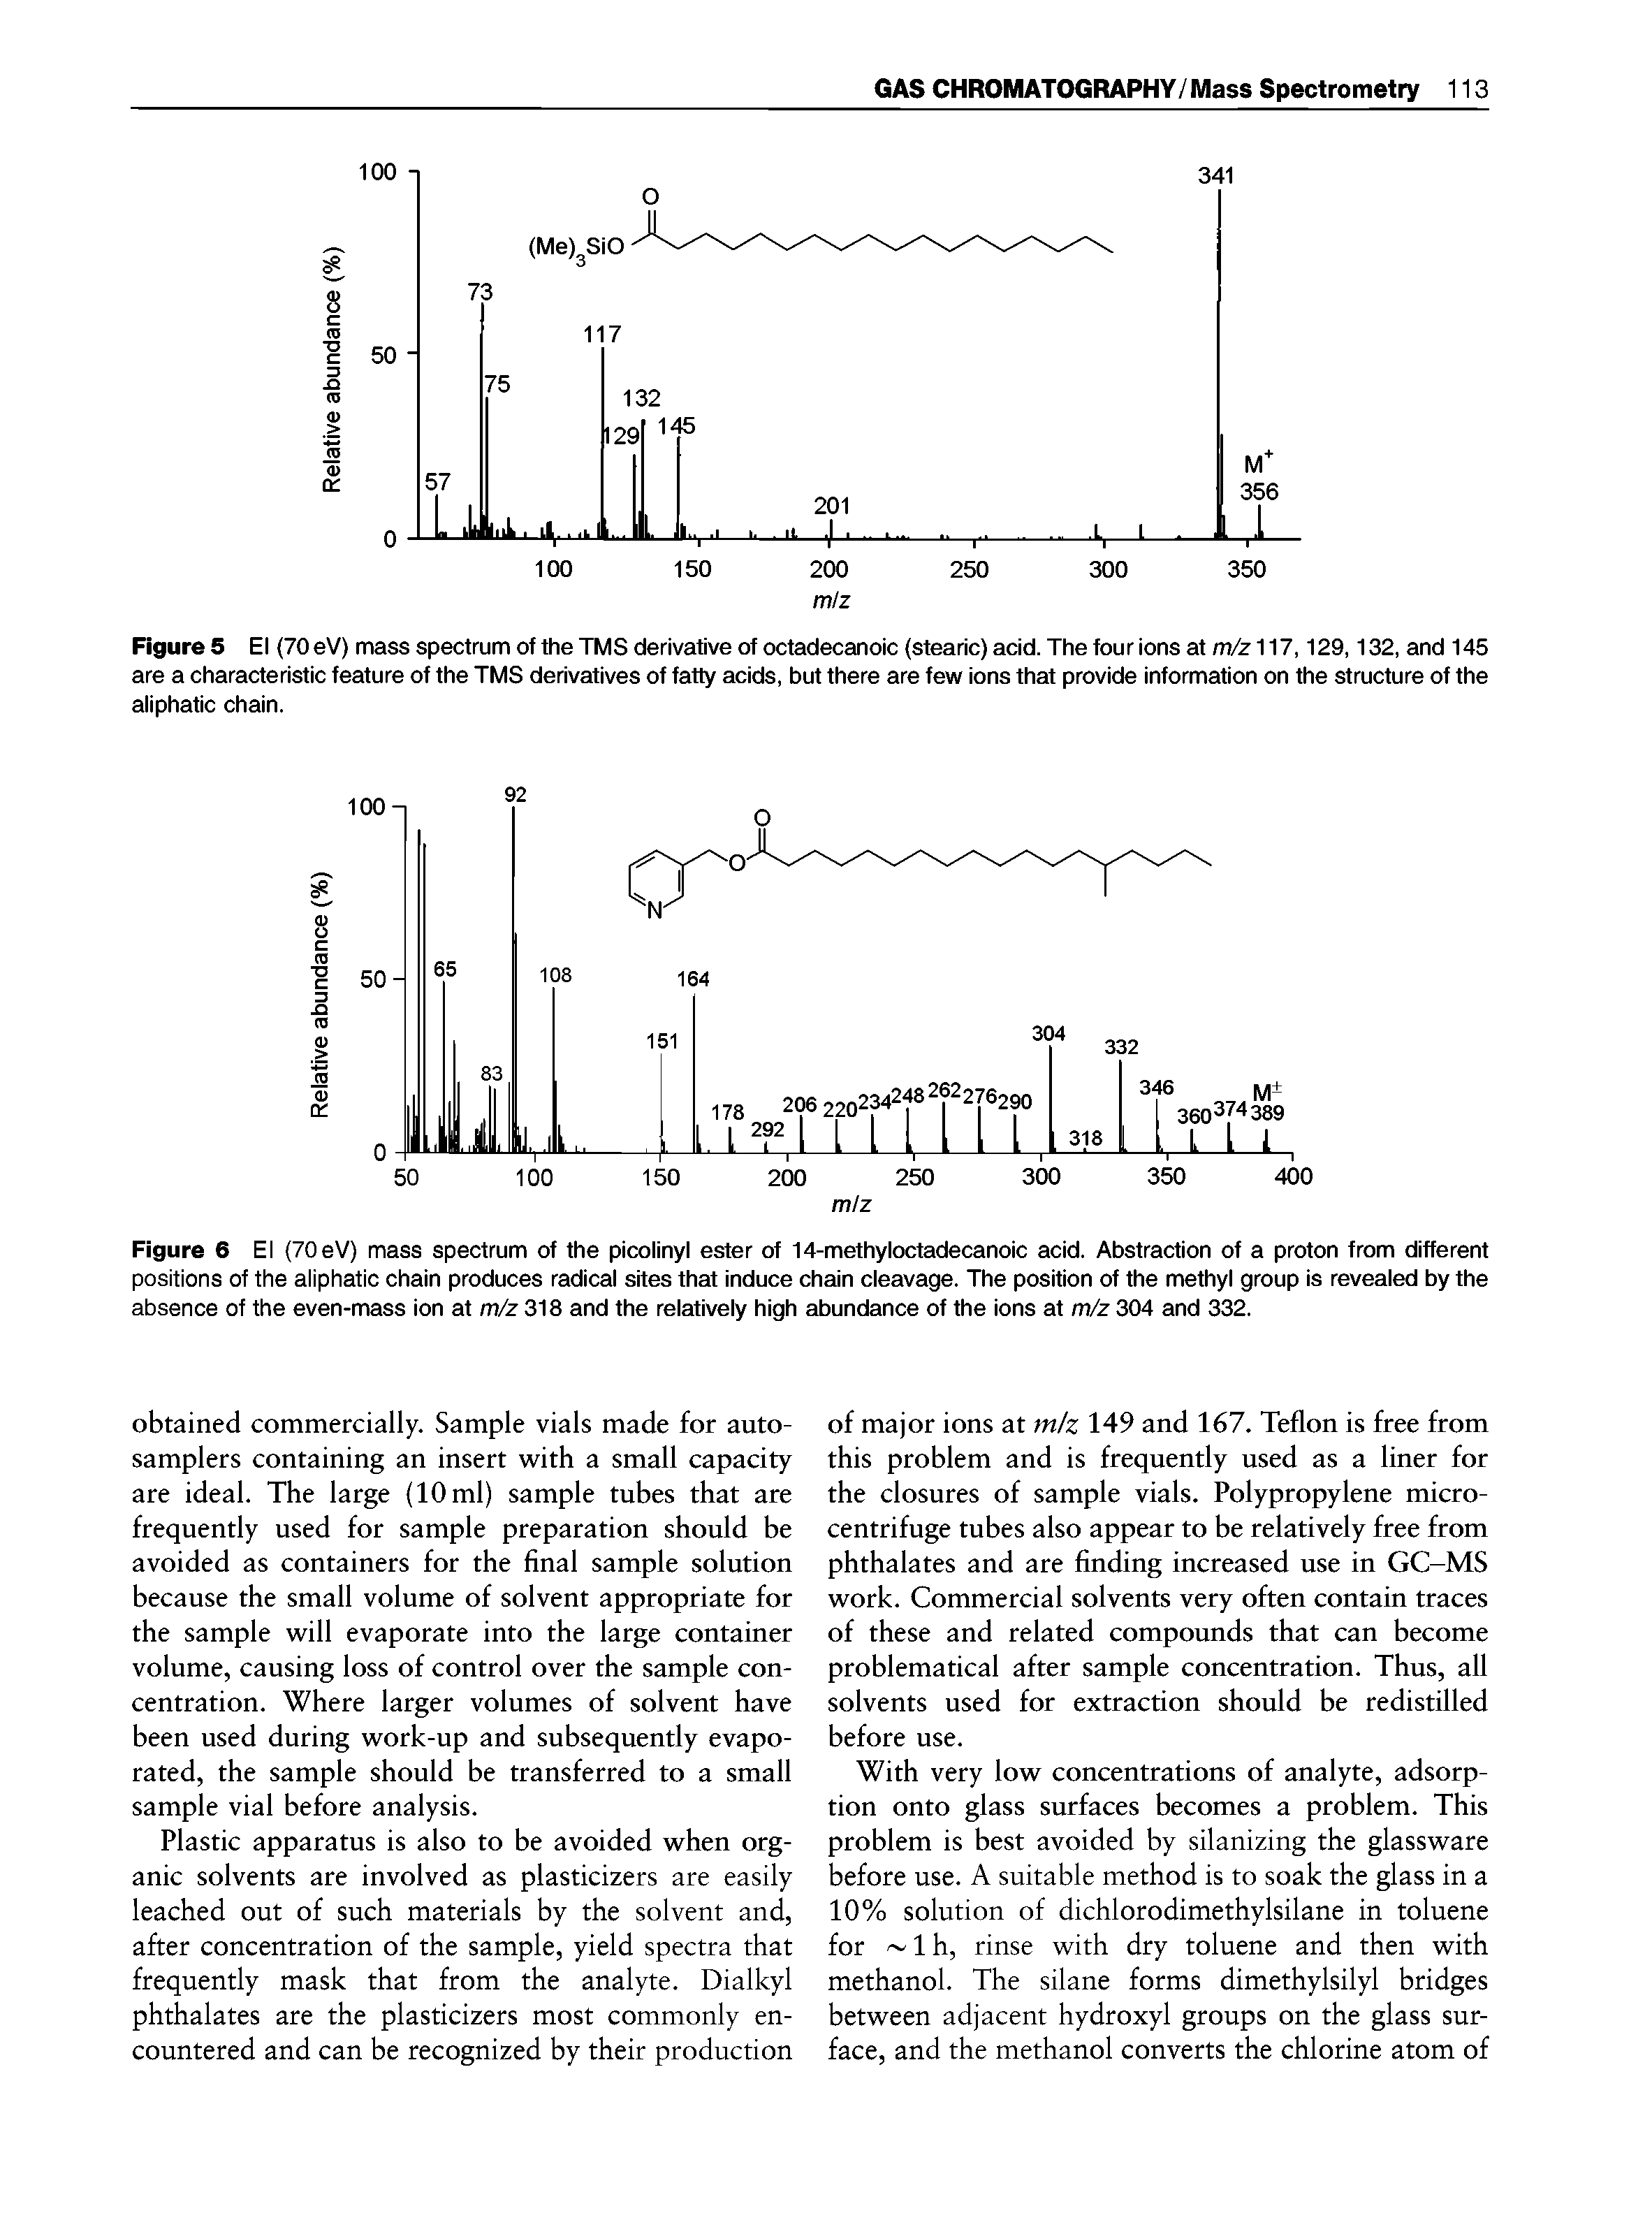 Figure 6 El (70eV) mass spectrum of the picolinyl ester of 14-methyloctadecanoic acid. Abstraction of a proton from different positions of the aiiphatic chain produces radical sites that induce chain cleavage. The position of the methyl group Is revealed by the absence of the even-mass ion at m/z 318 and the relatively high abundance of the ions at m/z 304 and 332.